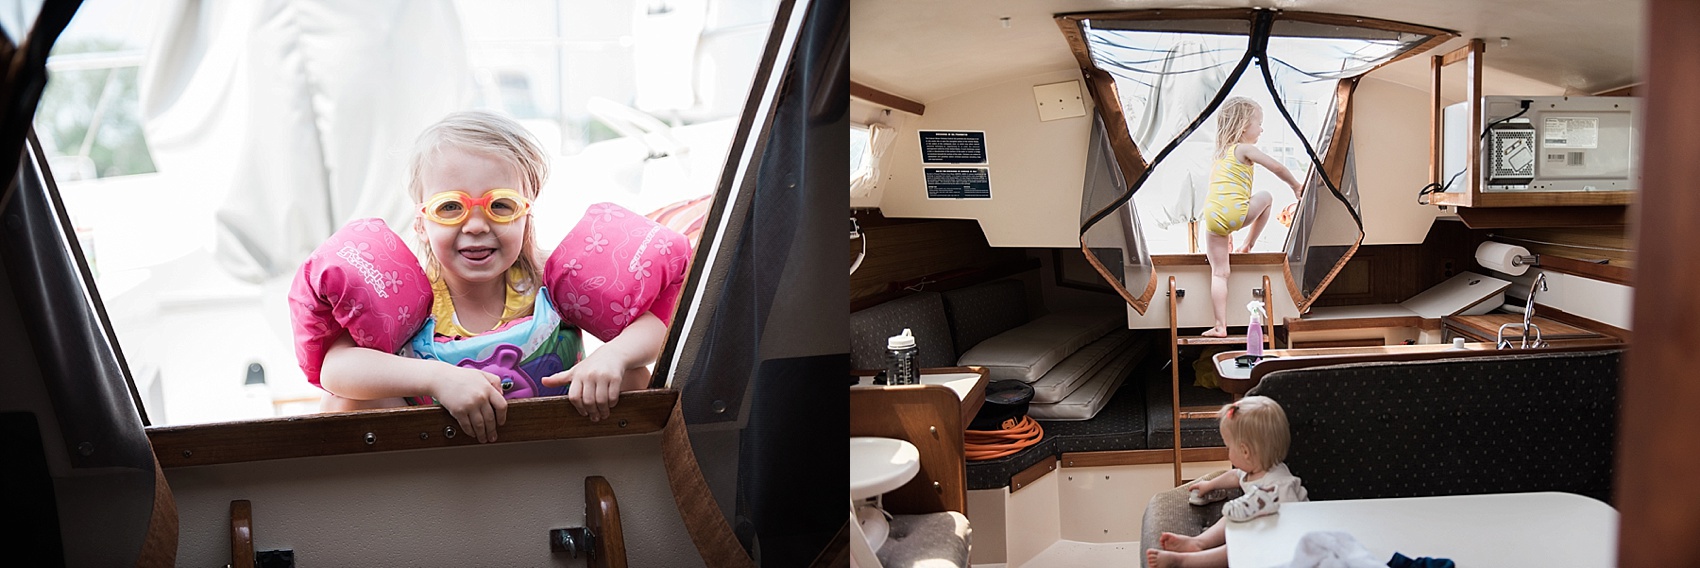 Michigan wedding and lifestyle photographer, Allie Siarto, shares a photo of her young daughter in swimmies climbing out of a Catalina 30 cabin